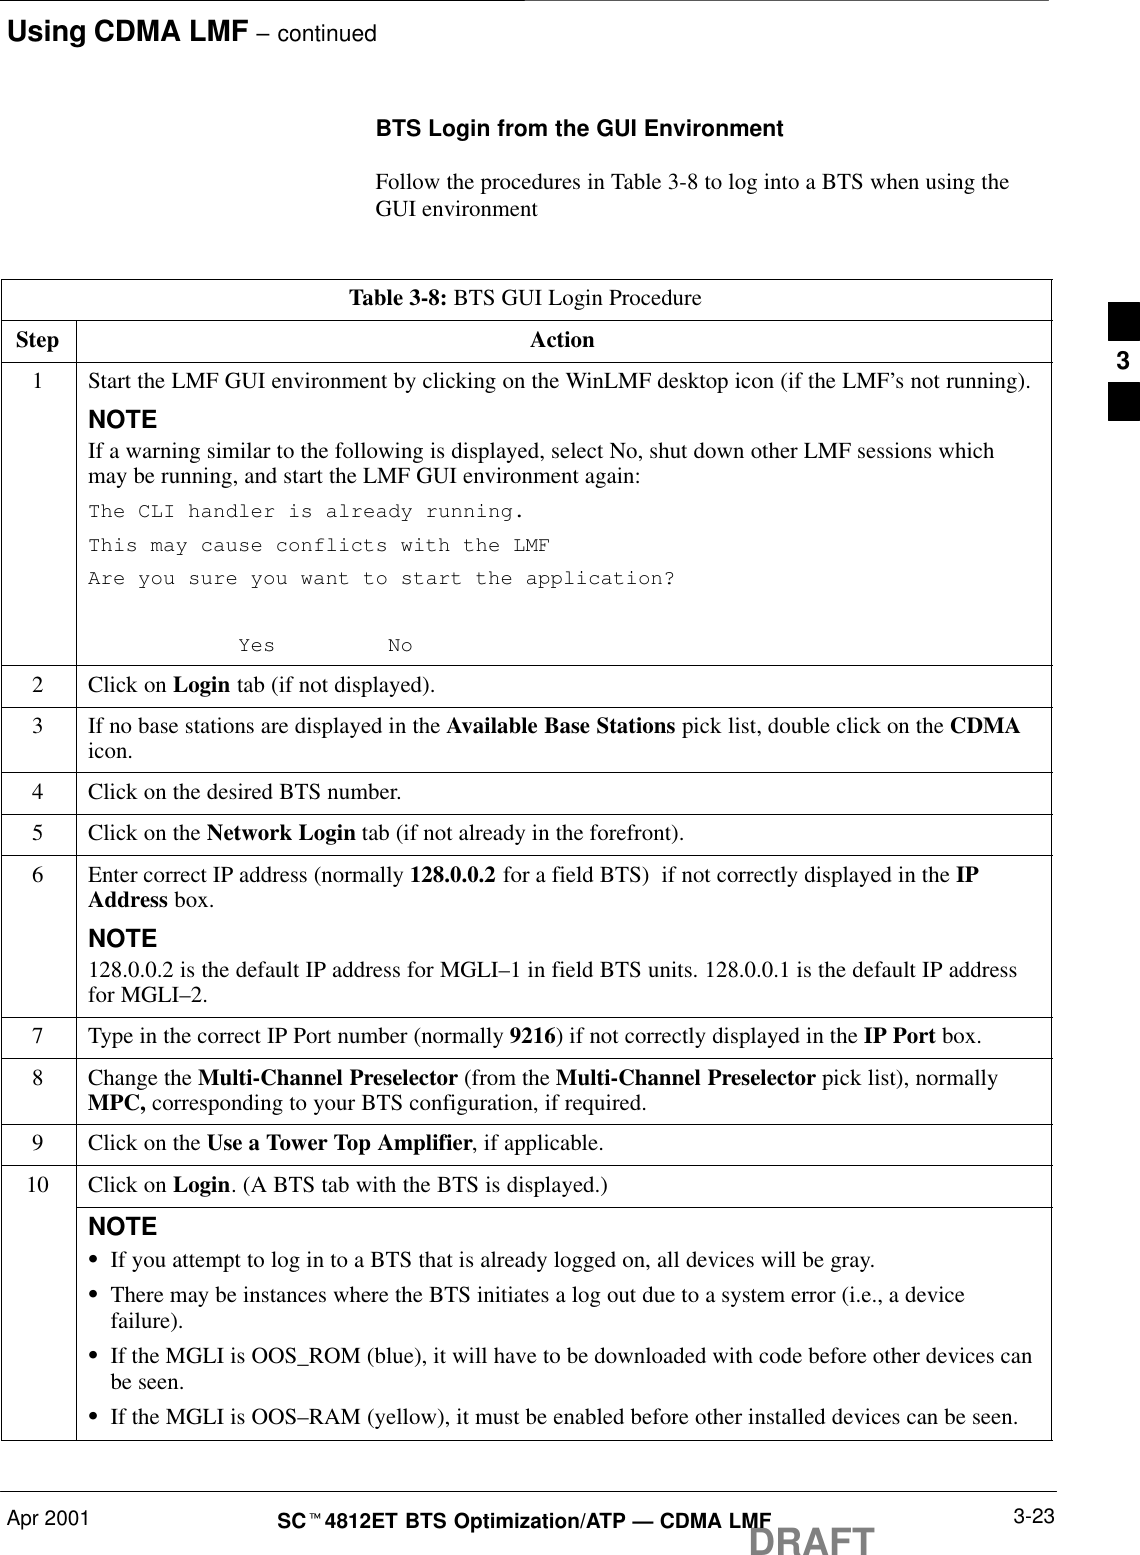 Using CDMA LMF – continuedDRAFTApr 2001 3-23SCt4812ET BTS Optimization/ATP — CDMA LMFBTS Login from the GUI EnvironmentFollow the procedures in Table 3-8 to log into a BTS when using theGUI environmentTable 3-8: BTS GUI Login ProcedureStep Action1Start the LMF GUI environment by clicking on the WinLMF desktop icon (if the LMF’s not running).NOTEIf a warning similar to the following is displayed, select No, shut down other LMF sessions whichmay be running, and start the LMF GUI environment again:The CLI handler is already running.This may cause conflicts with the LMFAre you sure you want to start the application?Yes No2Click on Login tab (if not displayed).3If no base stations are displayed in the Available Base Stations pick list, double click on the CDMAicon.4Click on the desired BTS number.5Click on the Network Login tab (if not already in the forefront).6Enter correct IP address (normally 128.0.0.2 for a field BTS)  if not correctly displayed in the IPAddress box.NOTE128.0.0.2 is the default IP address for MGLI–1 in field BTS units. 128.0.0.1 is the default IP addressfor MGLI–2.7Type in the correct IP Port number (normally 9216) if not correctly displayed in the IP Port box.8Change the Multi-Channel Preselector (from the Multi-Channel Preselector pick list), normallyMPC, corresponding to your BTS configuration, if required.9Click on the Use a Tower Top Amplifier, if applicable.10 Click on Login. (A BTS tab with the BTS is displayed.)NOTESIf you attempt to log in to a BTS that is already logged on, all devices will be gray.SThere may be instances where the BTS initiates a log out due to a system error (i.e., a devicefailure).SIf the MGLI is OOS_ROM (blue), it will have to be downloaded with code before other devices canbe seen.SIf the MGLI is OOS–RAM (yellow), it must be enabled before other installed devices can be seen. 3